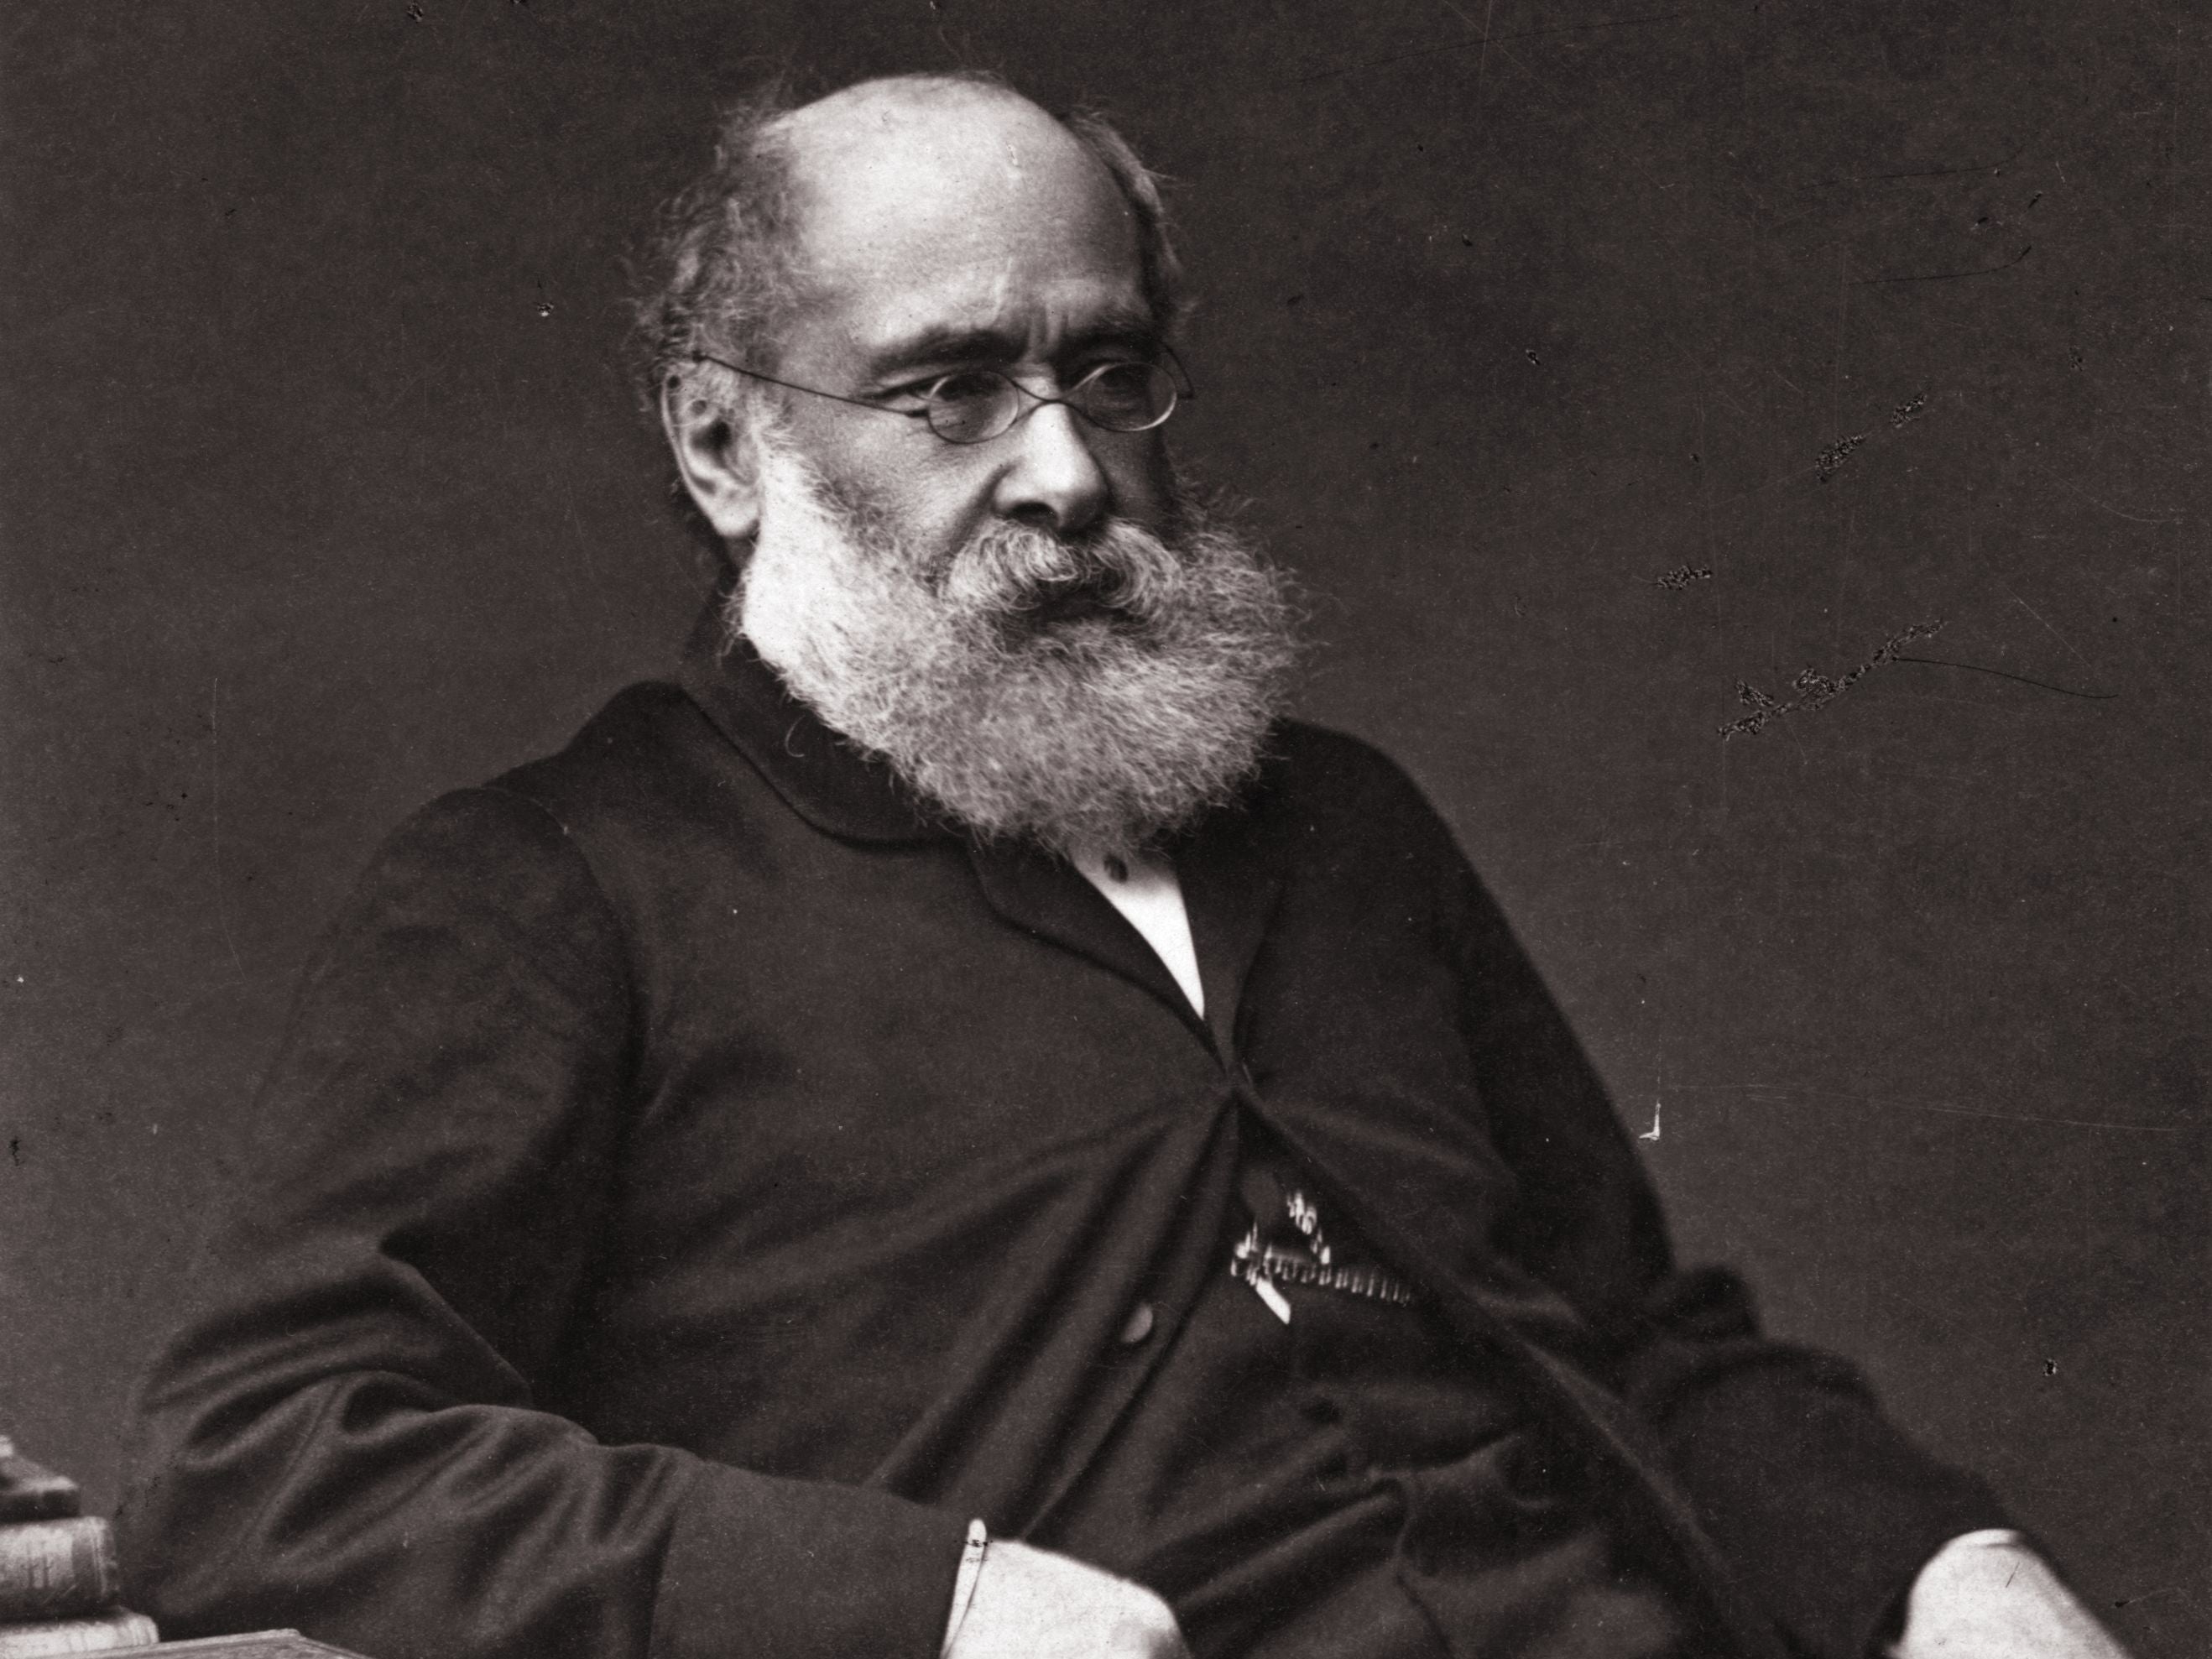 Anthony Trollope, circa 1875 – the year ‘The Way We Live Now’ was published